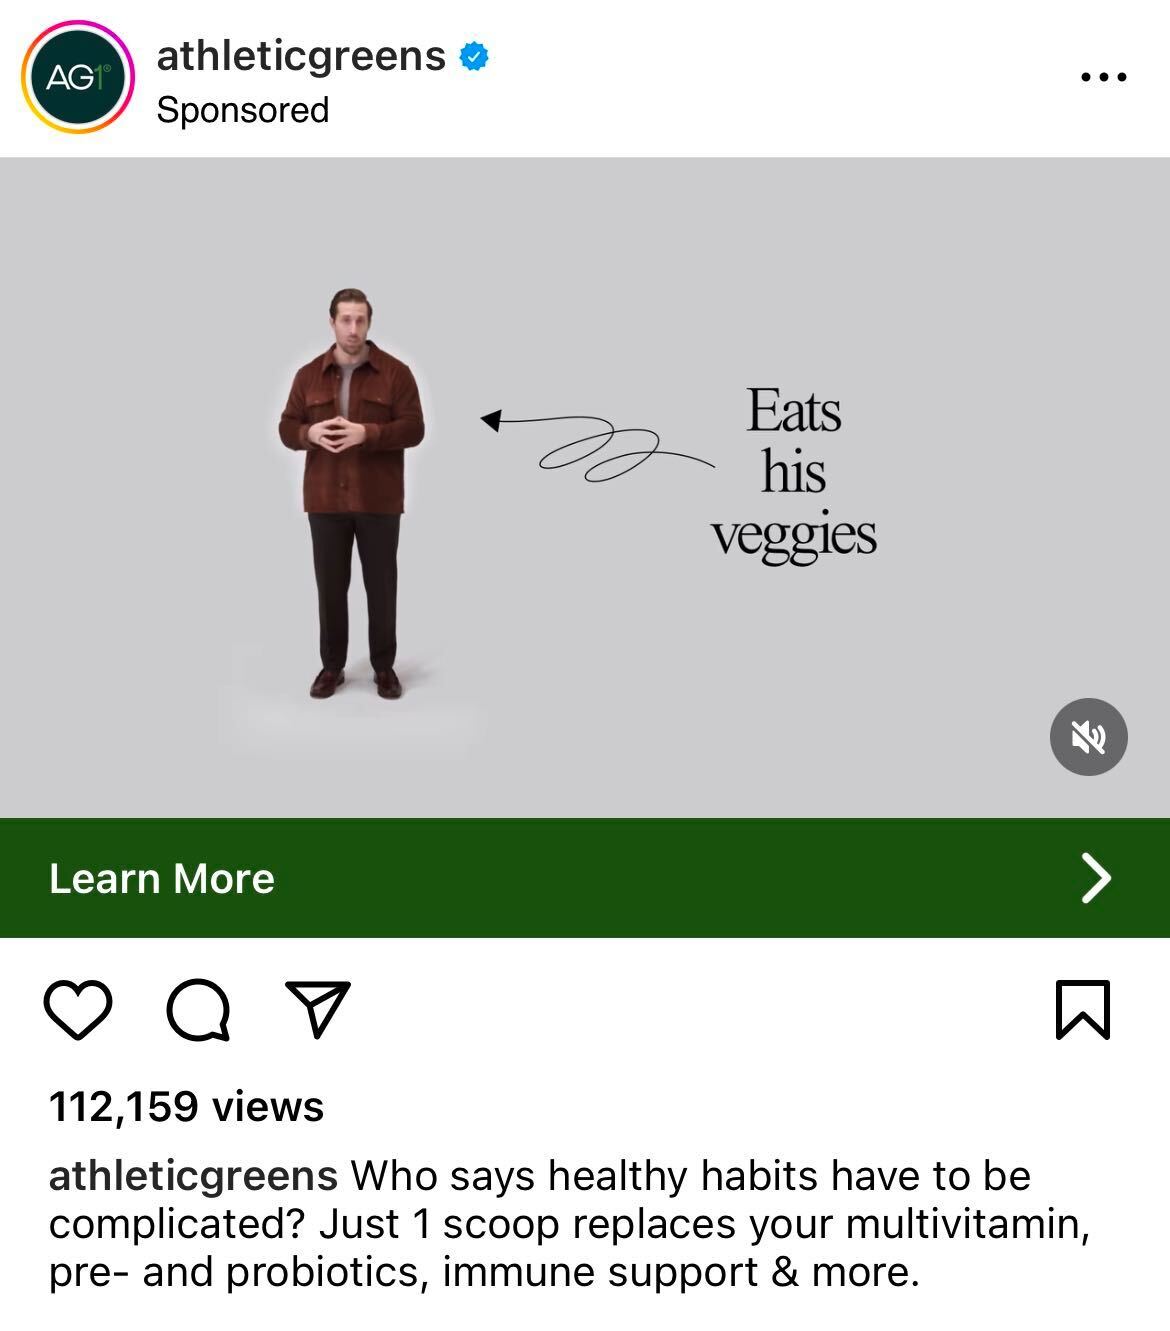 A sponsored Ad for Athletic Greens on Instagram